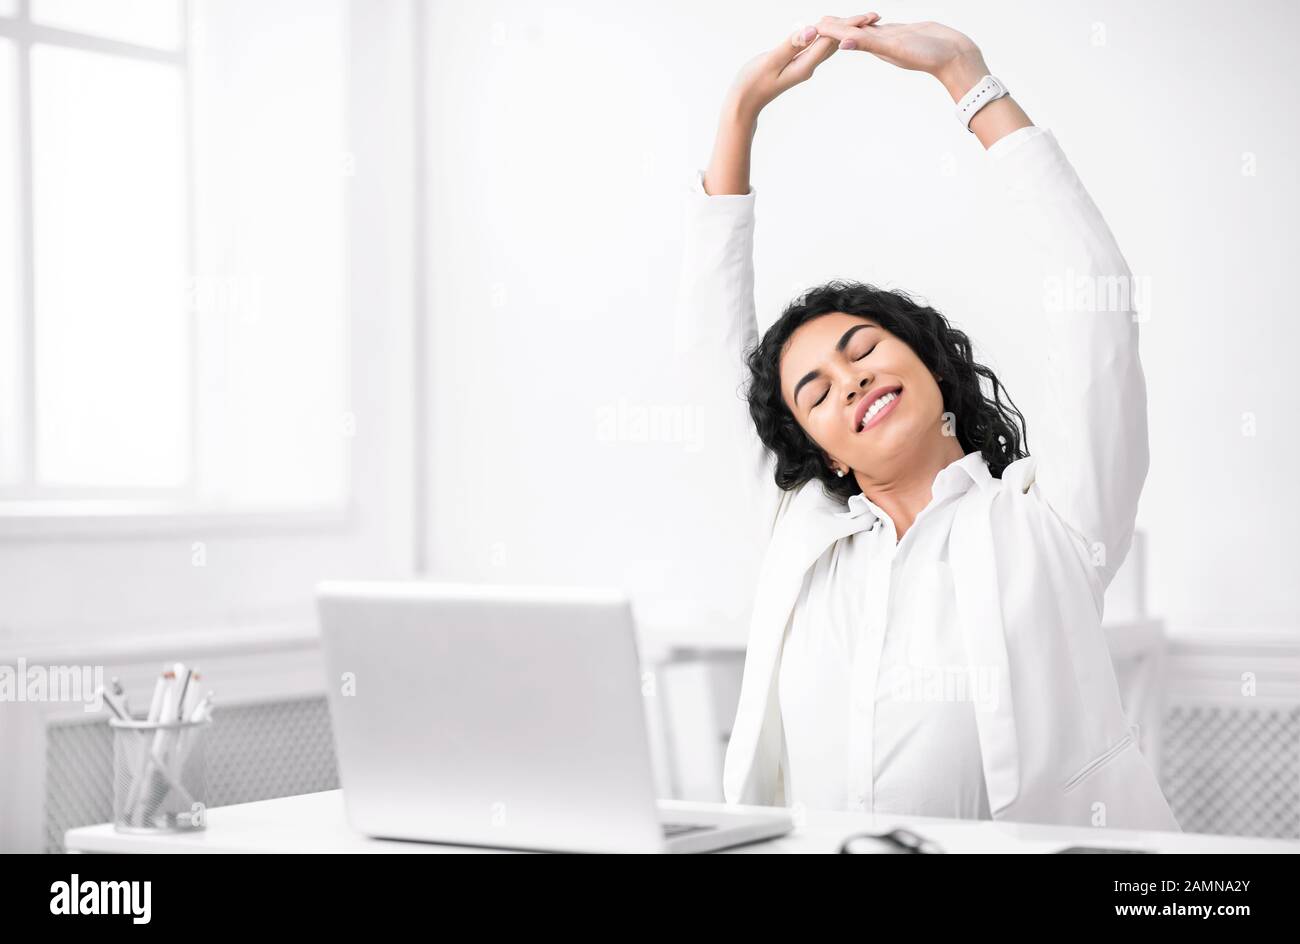 Mexican manager stretching hands at work place Stock Photo